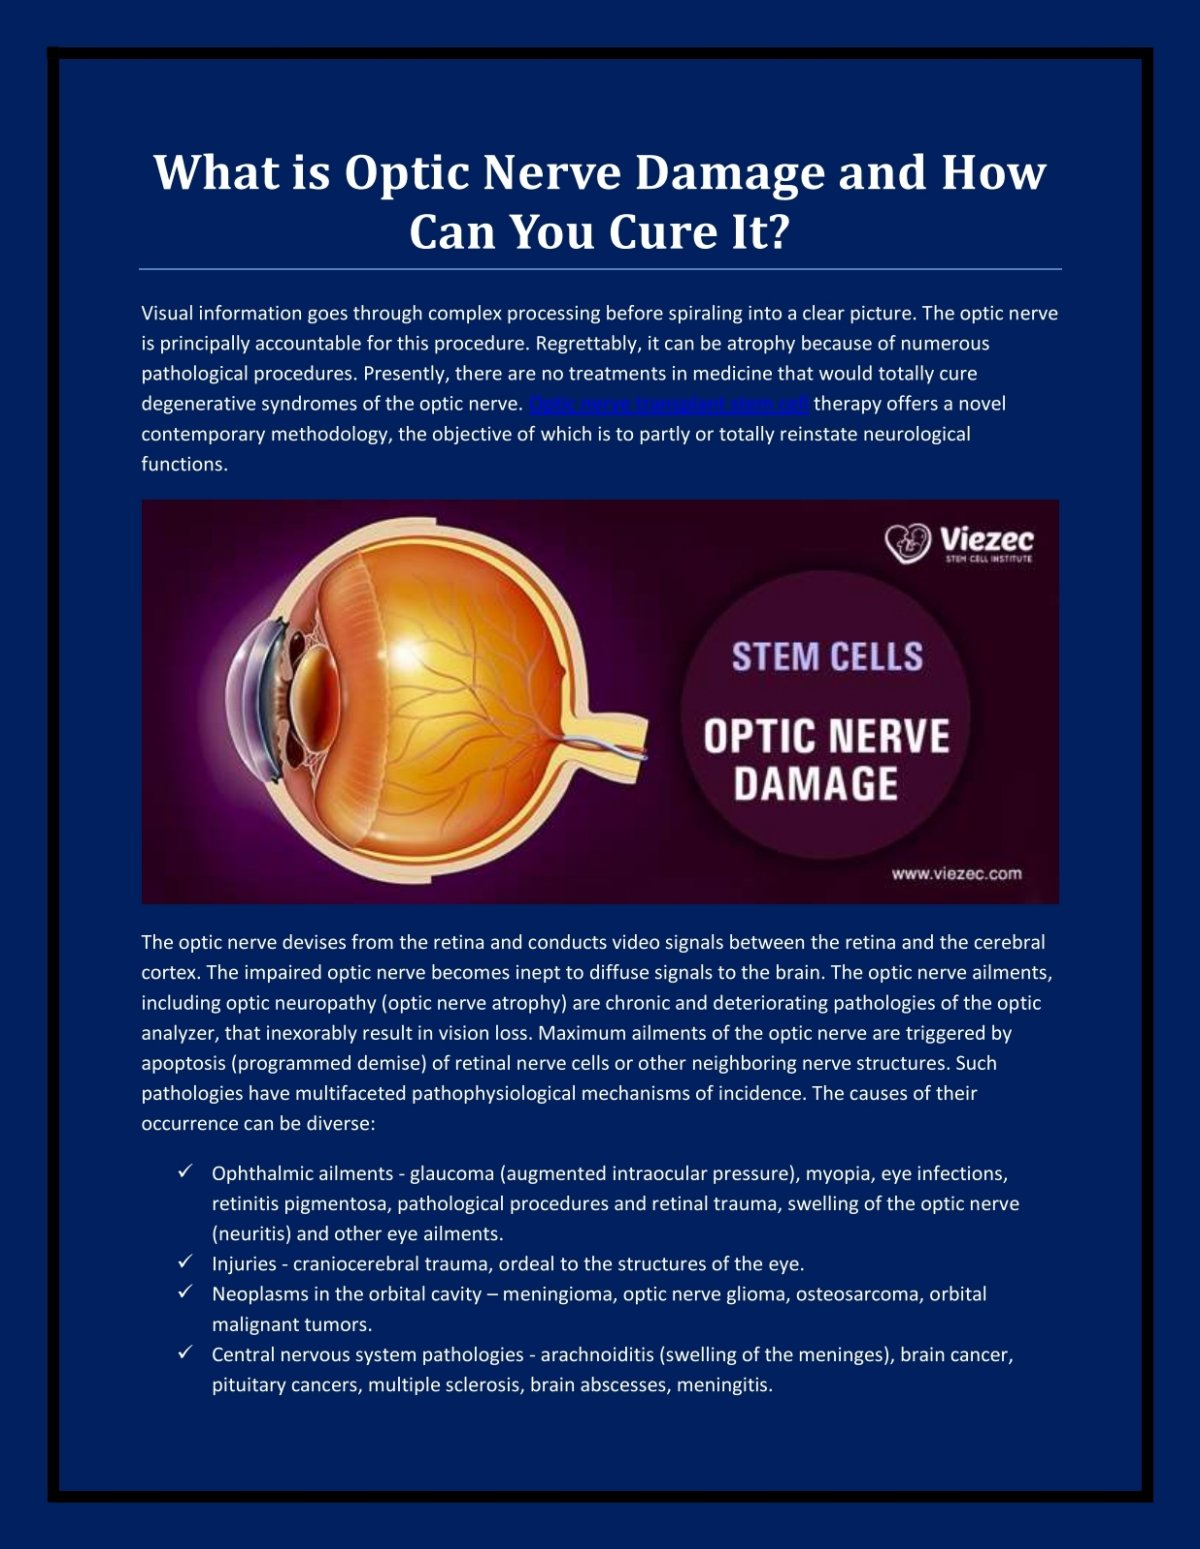 Can a damaged optic nerve be repaired?